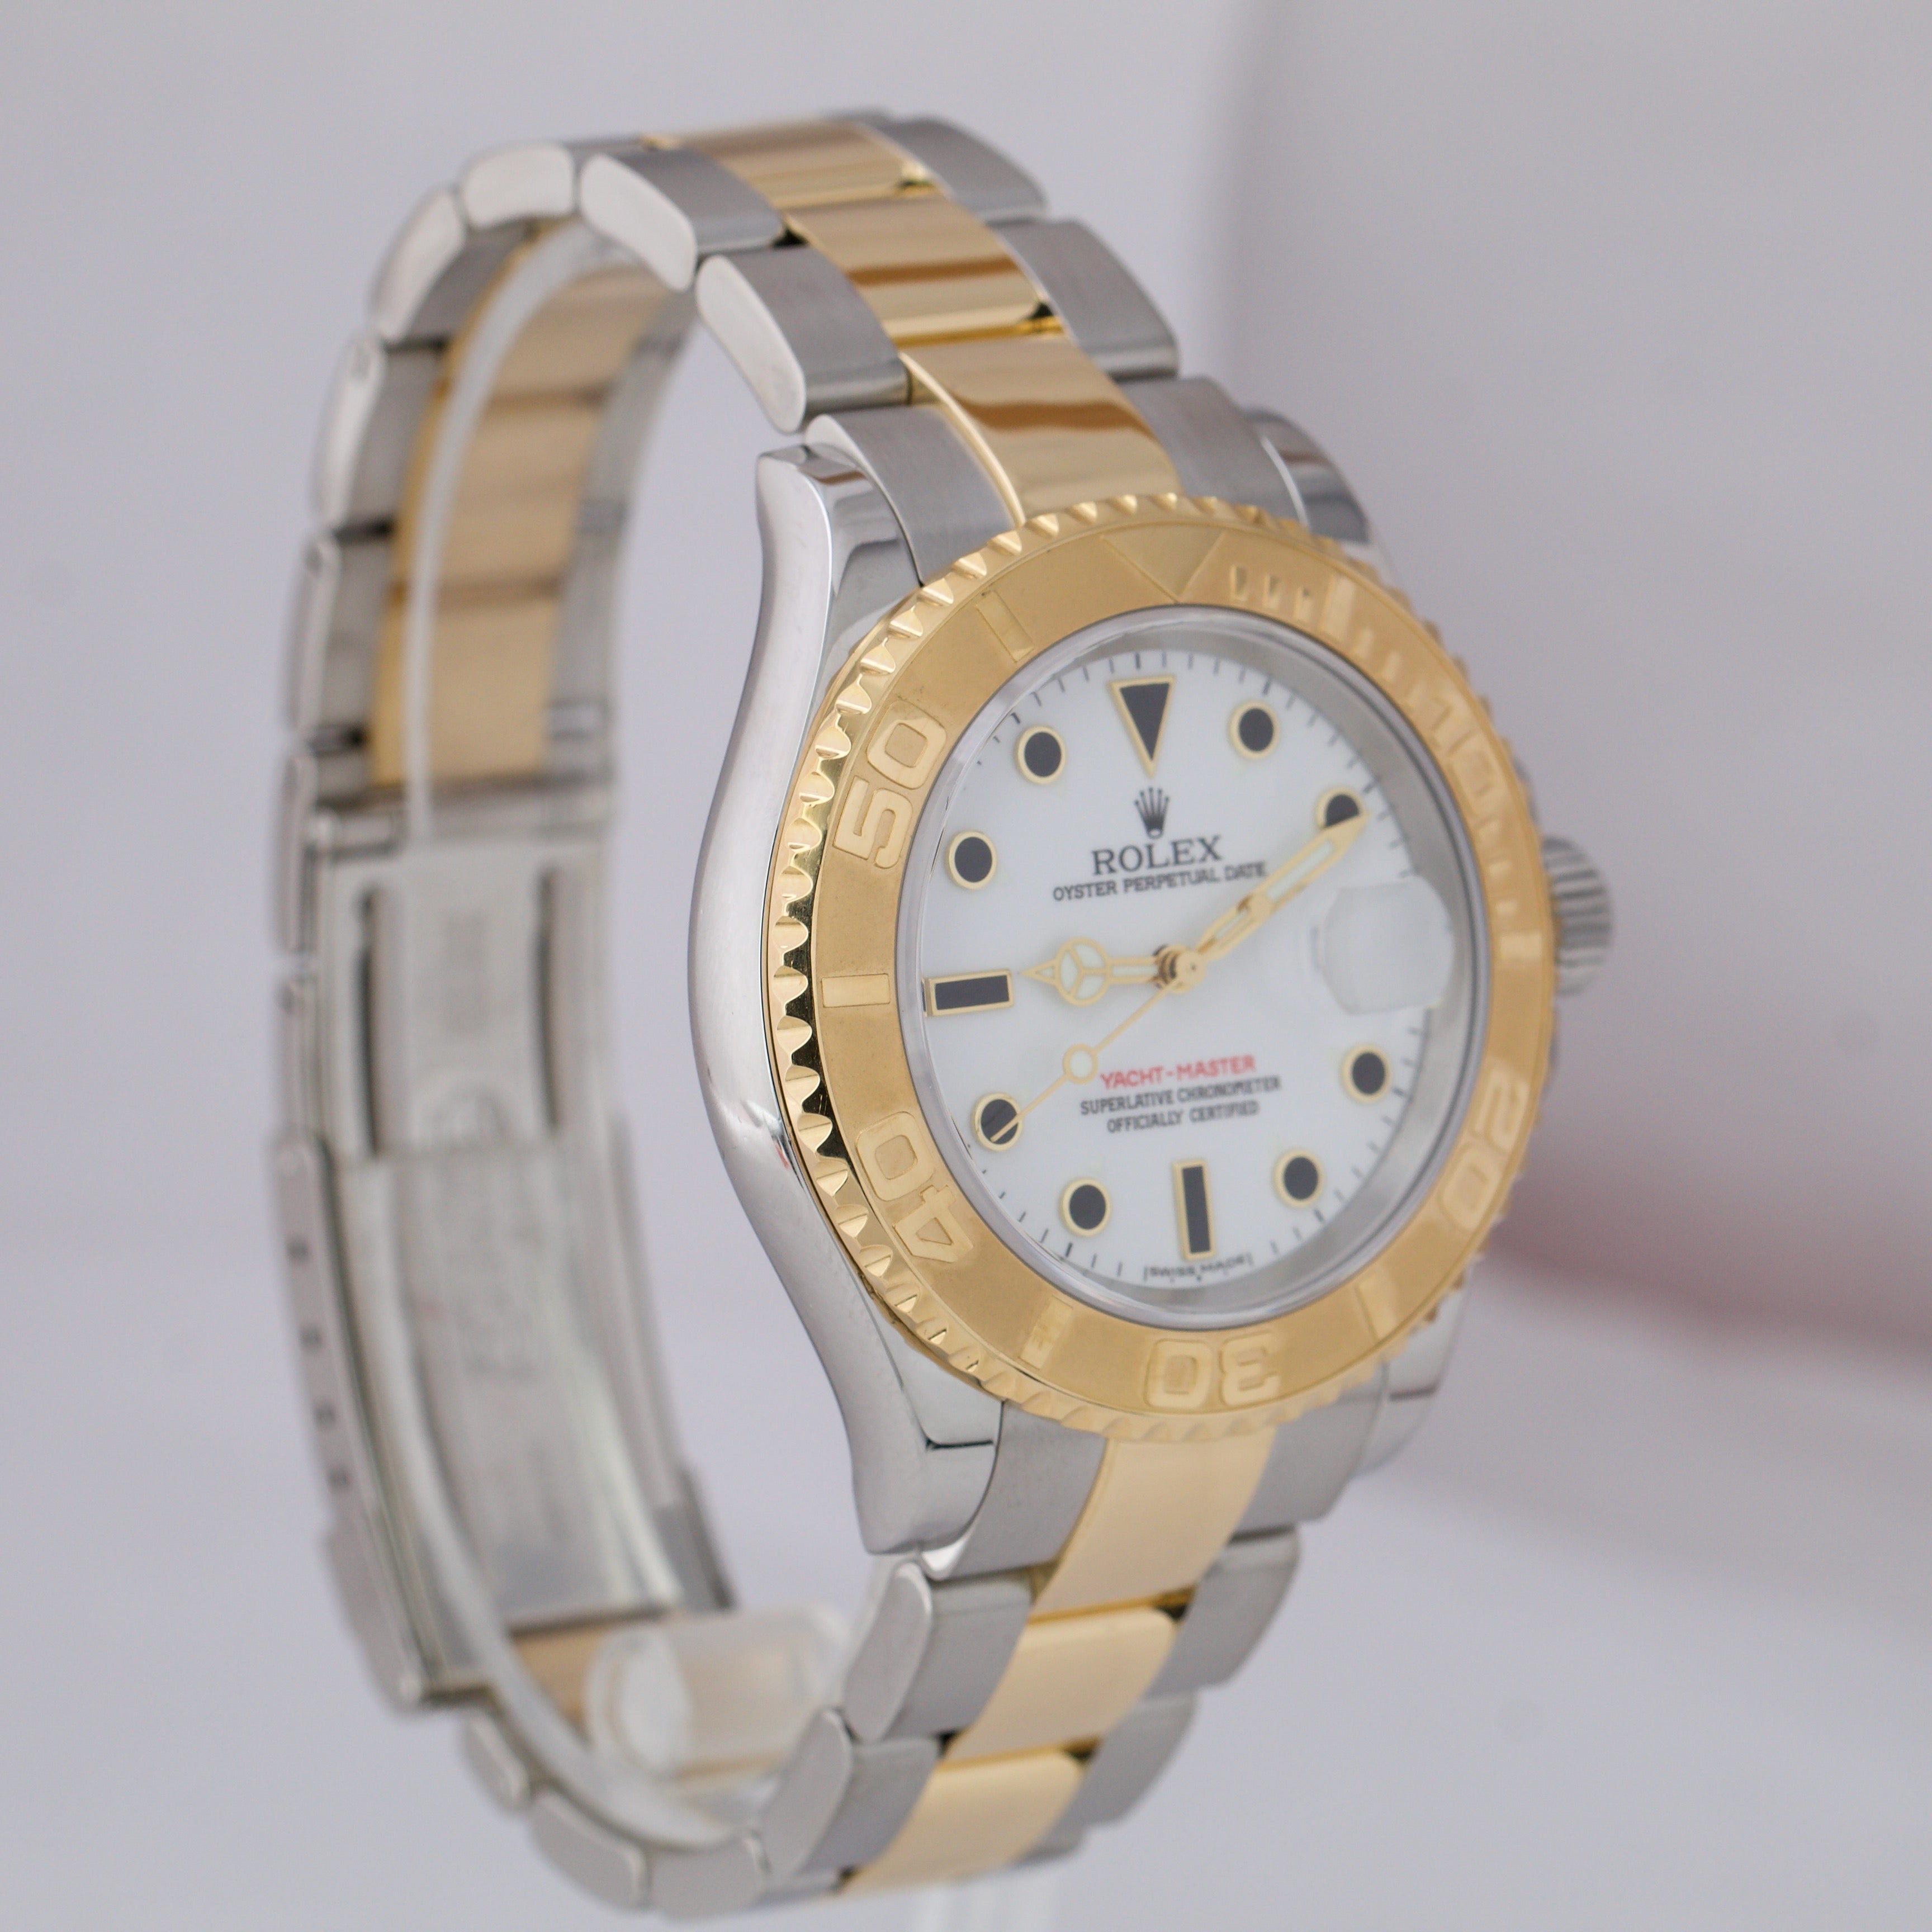 2009 Rolex Yacht-Master 16623 White 40mm 18K Two Tone Gold Steel Date Watch B+P